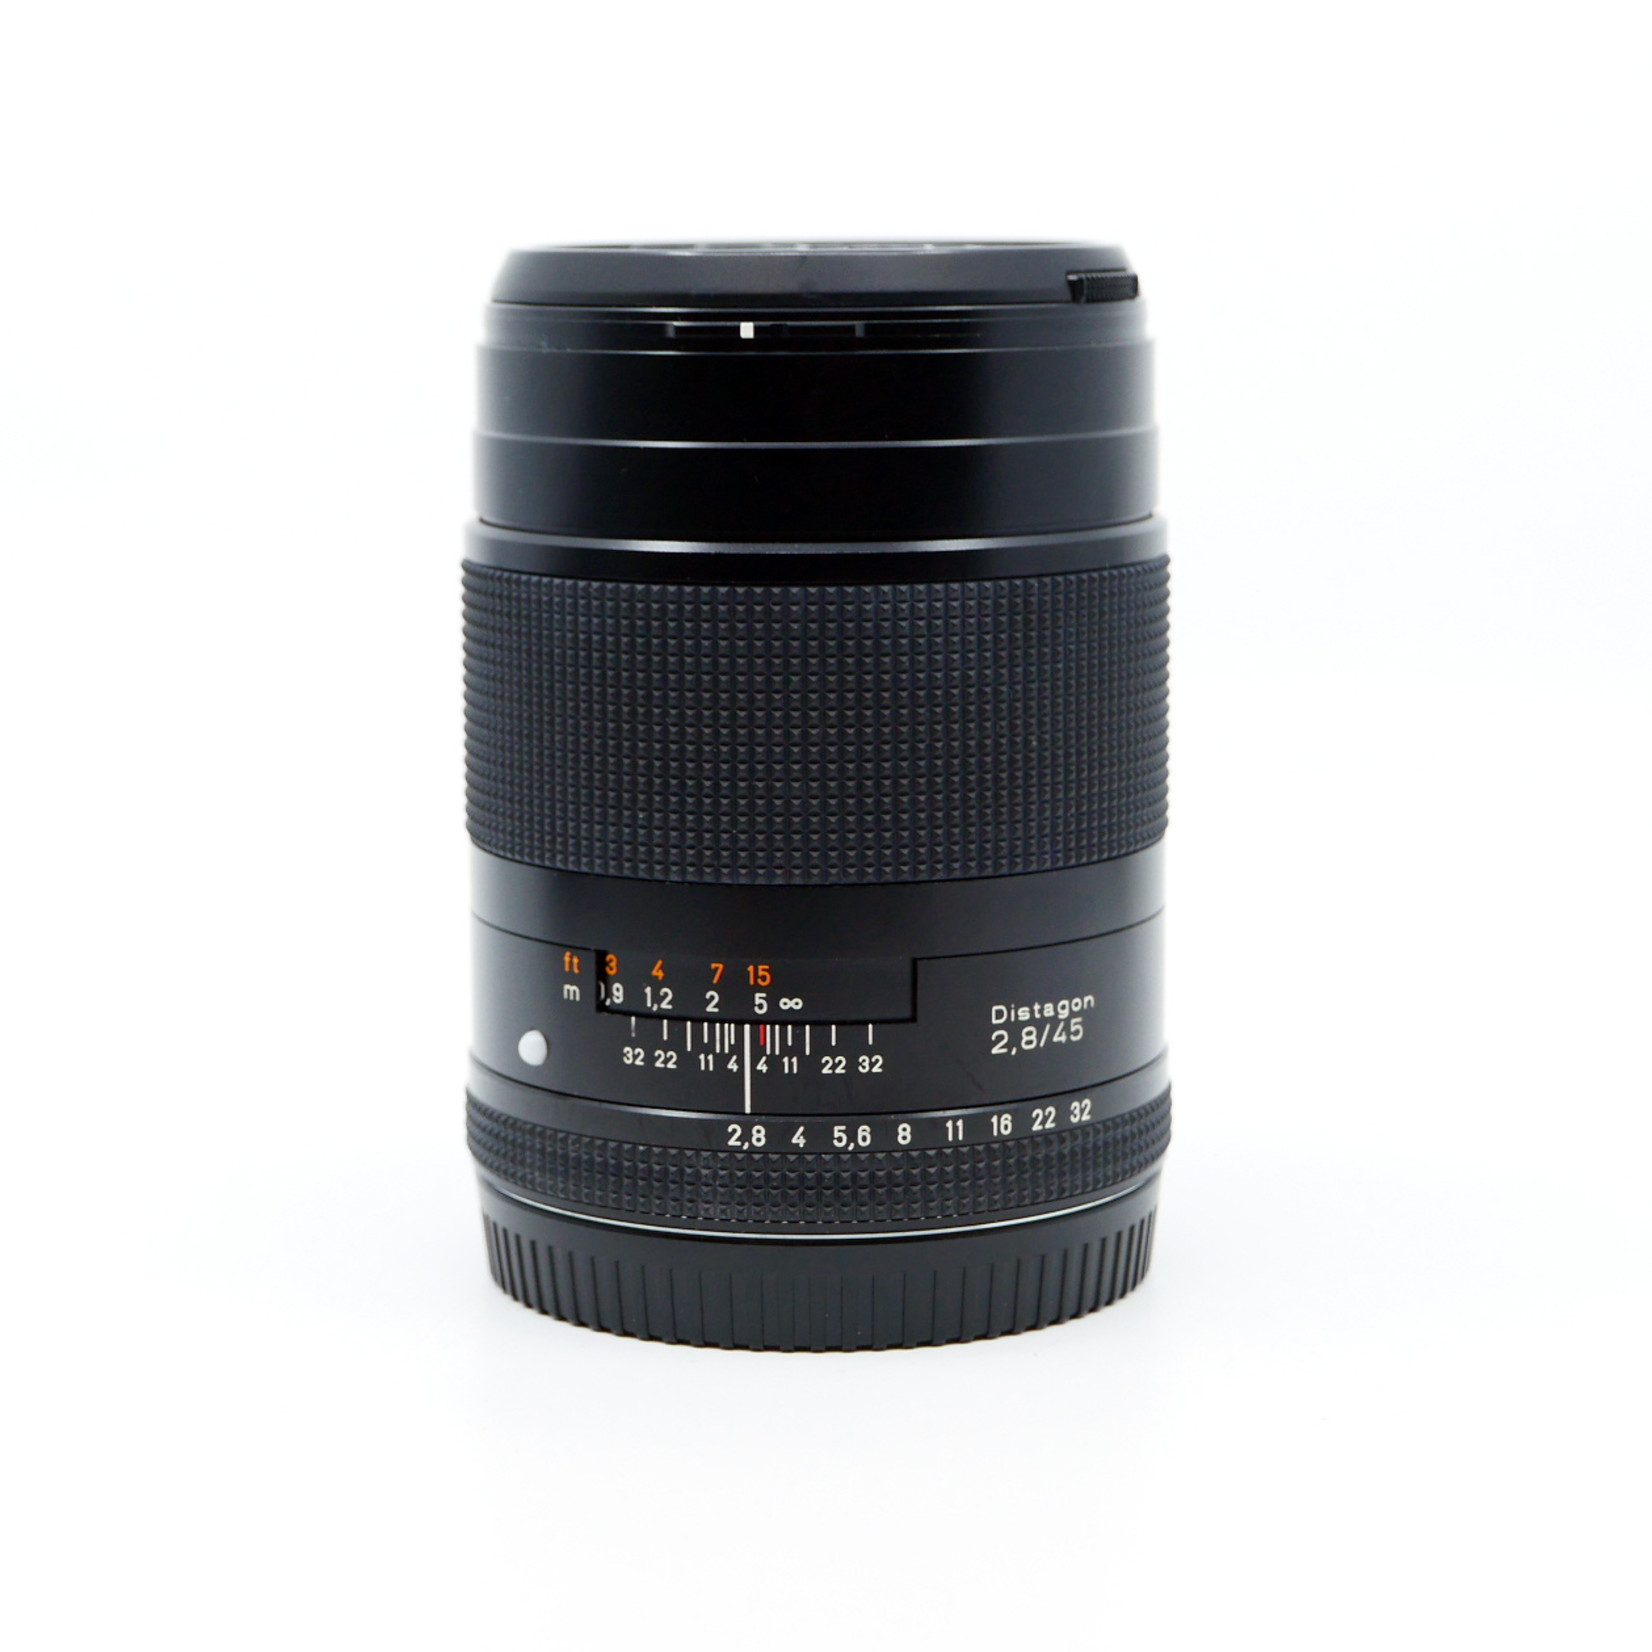 Contax Zeiss 45mm f/2.8 Distagon T* for Contax 645 (Open Box New Old Stock)